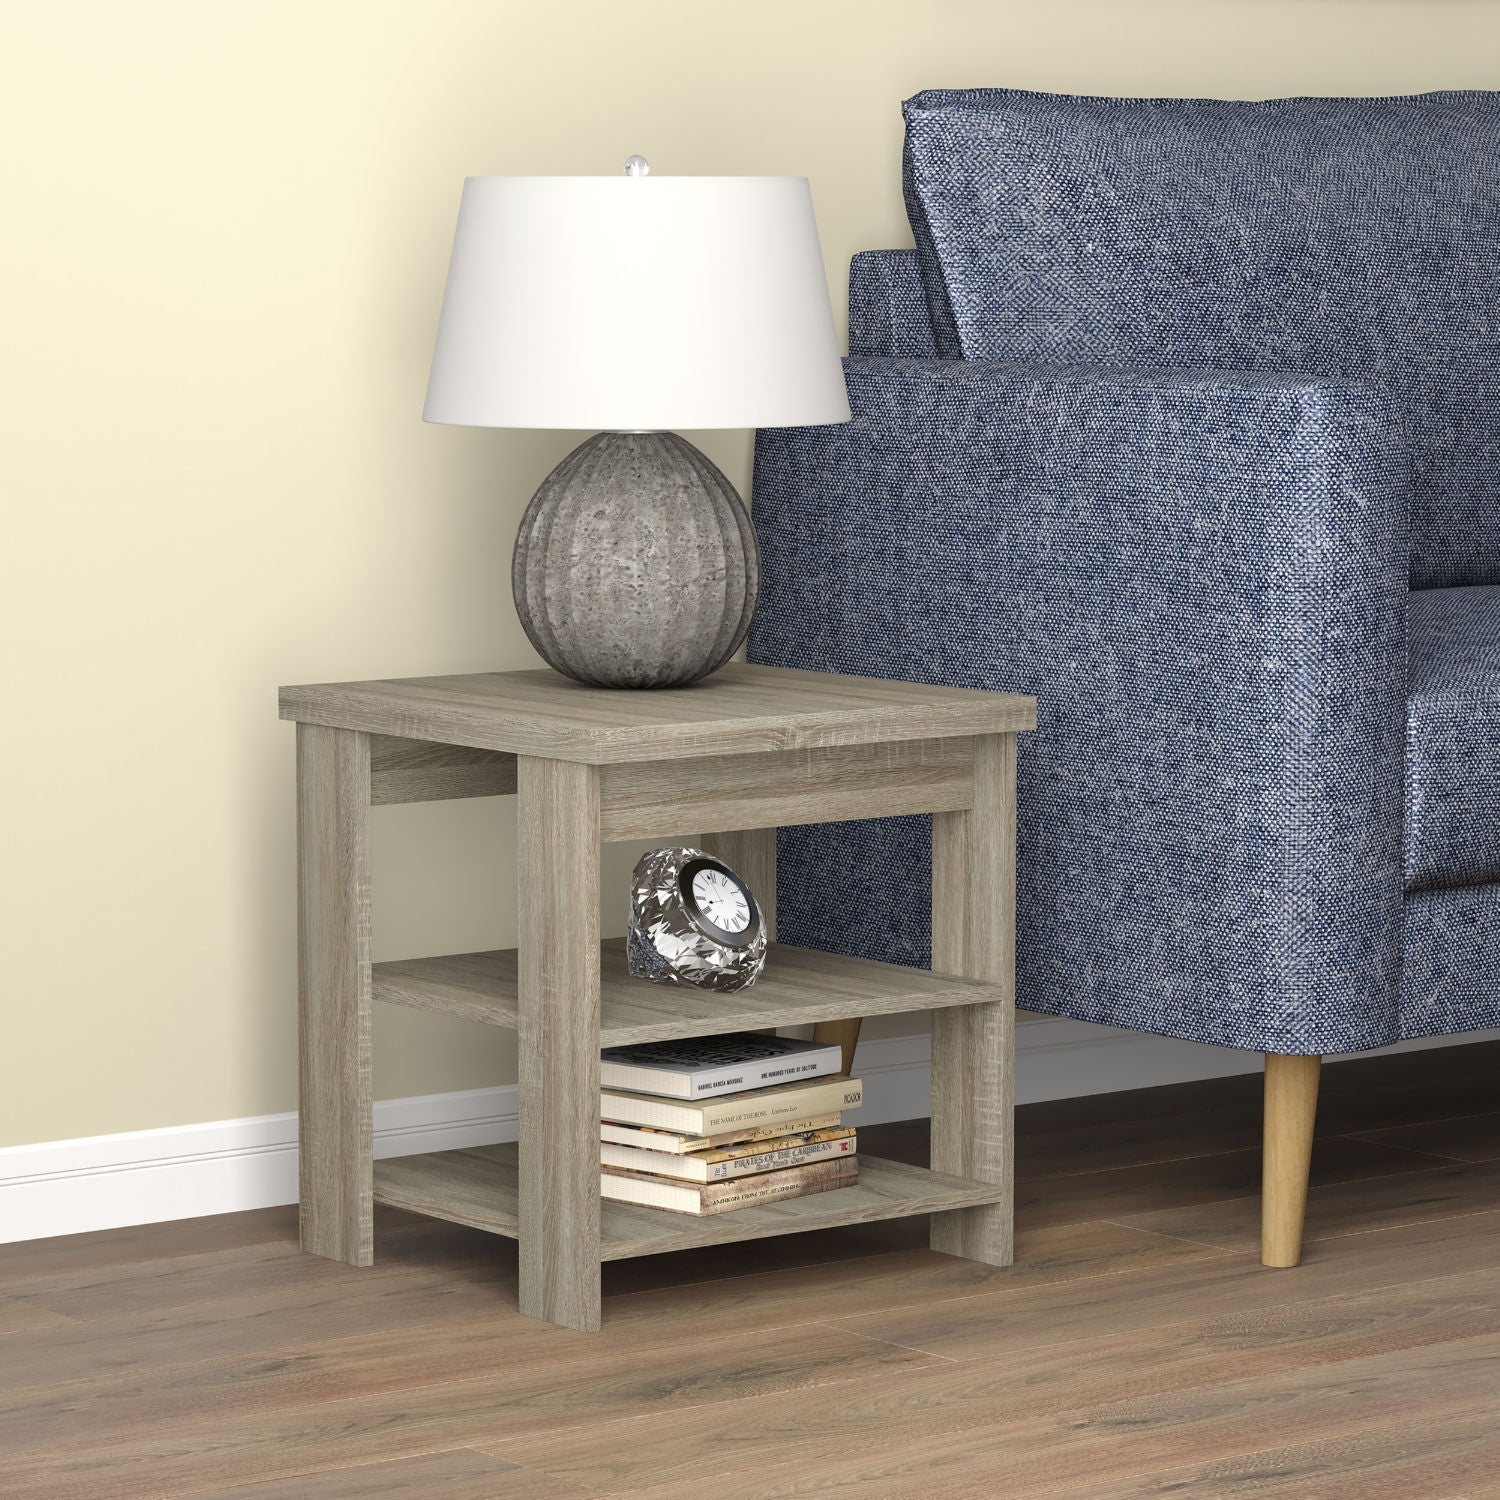 End Accent Table Square Dark Taupe 2 Shelves - DecoElegance - End Accent Table